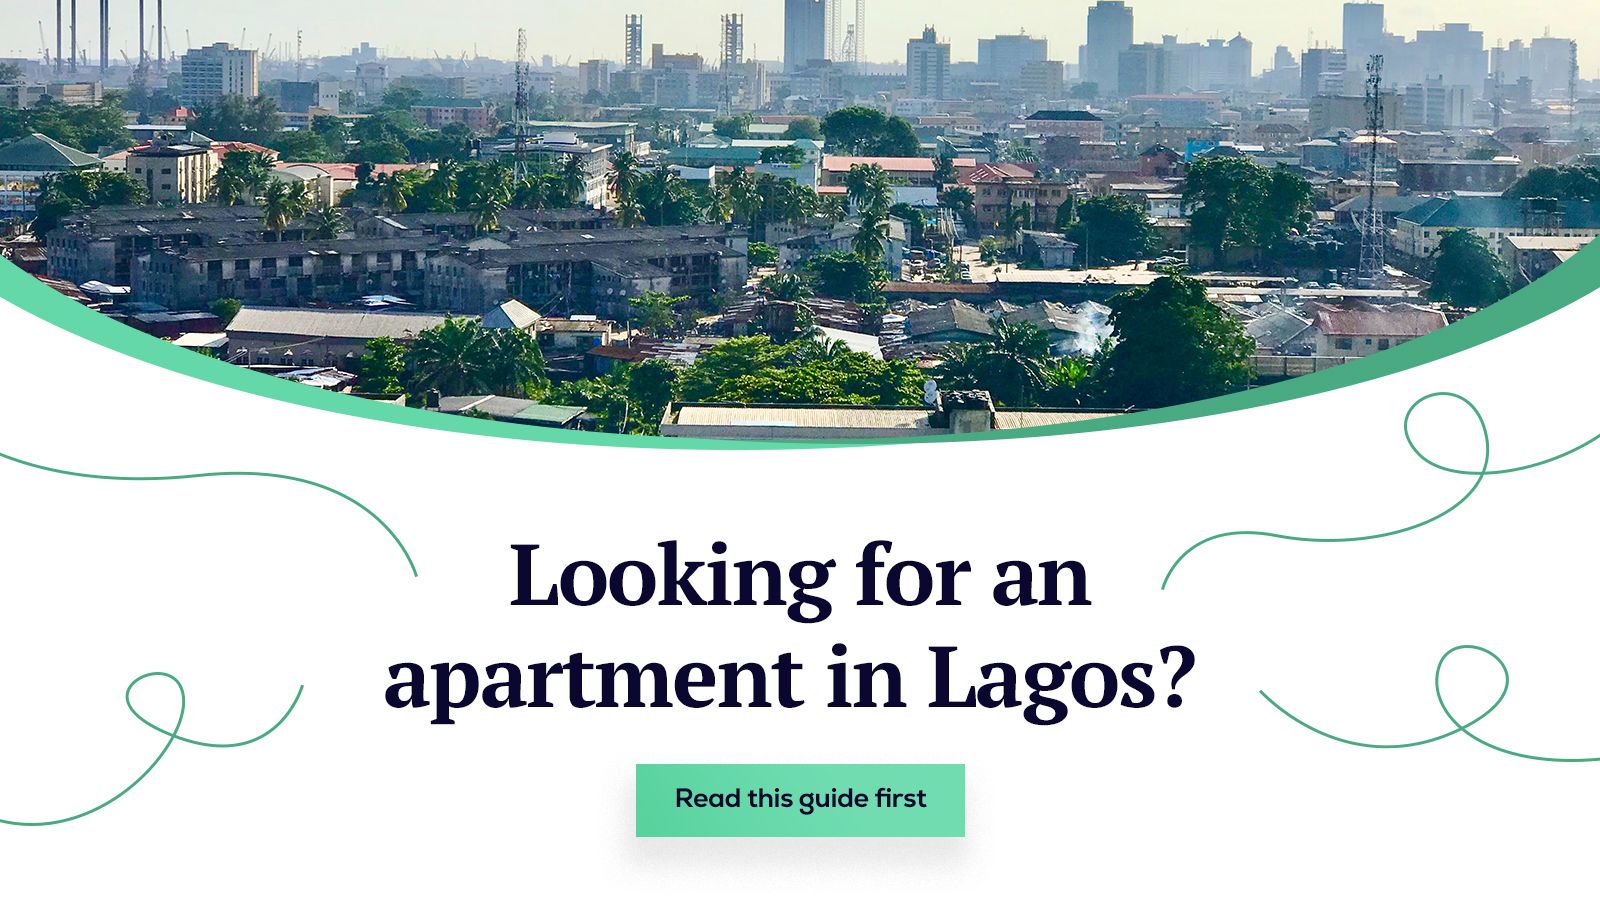 House hunting in Lagos? Read this guide first.